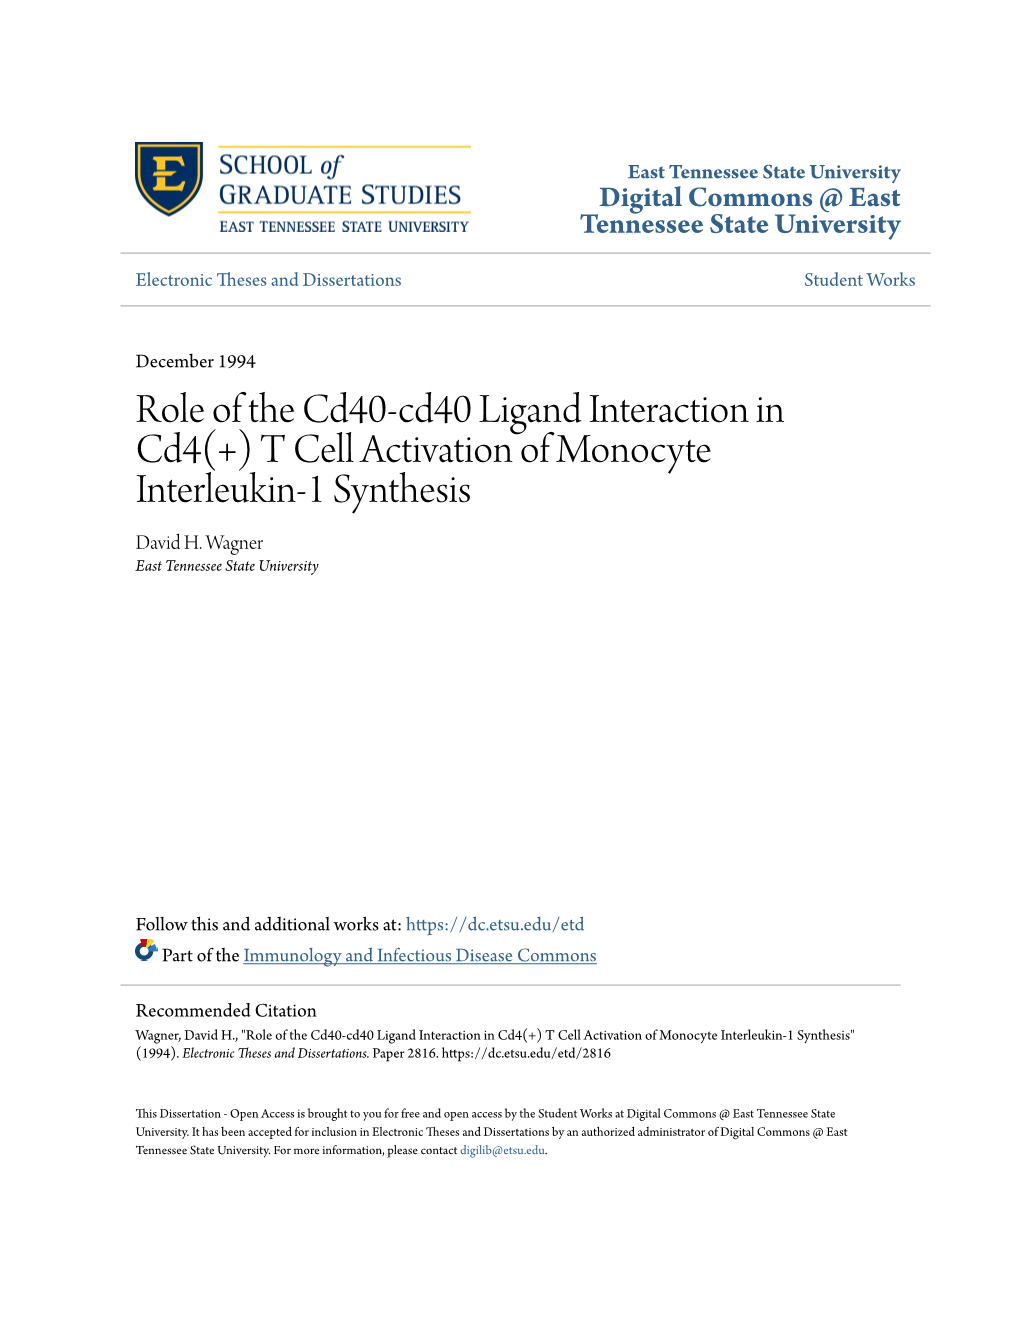 Role of the Cd40-Cd40 Ligand Interaction in Cd4(+) T Cell Activation of Monocyte Interleukin-1 Synthesis David H